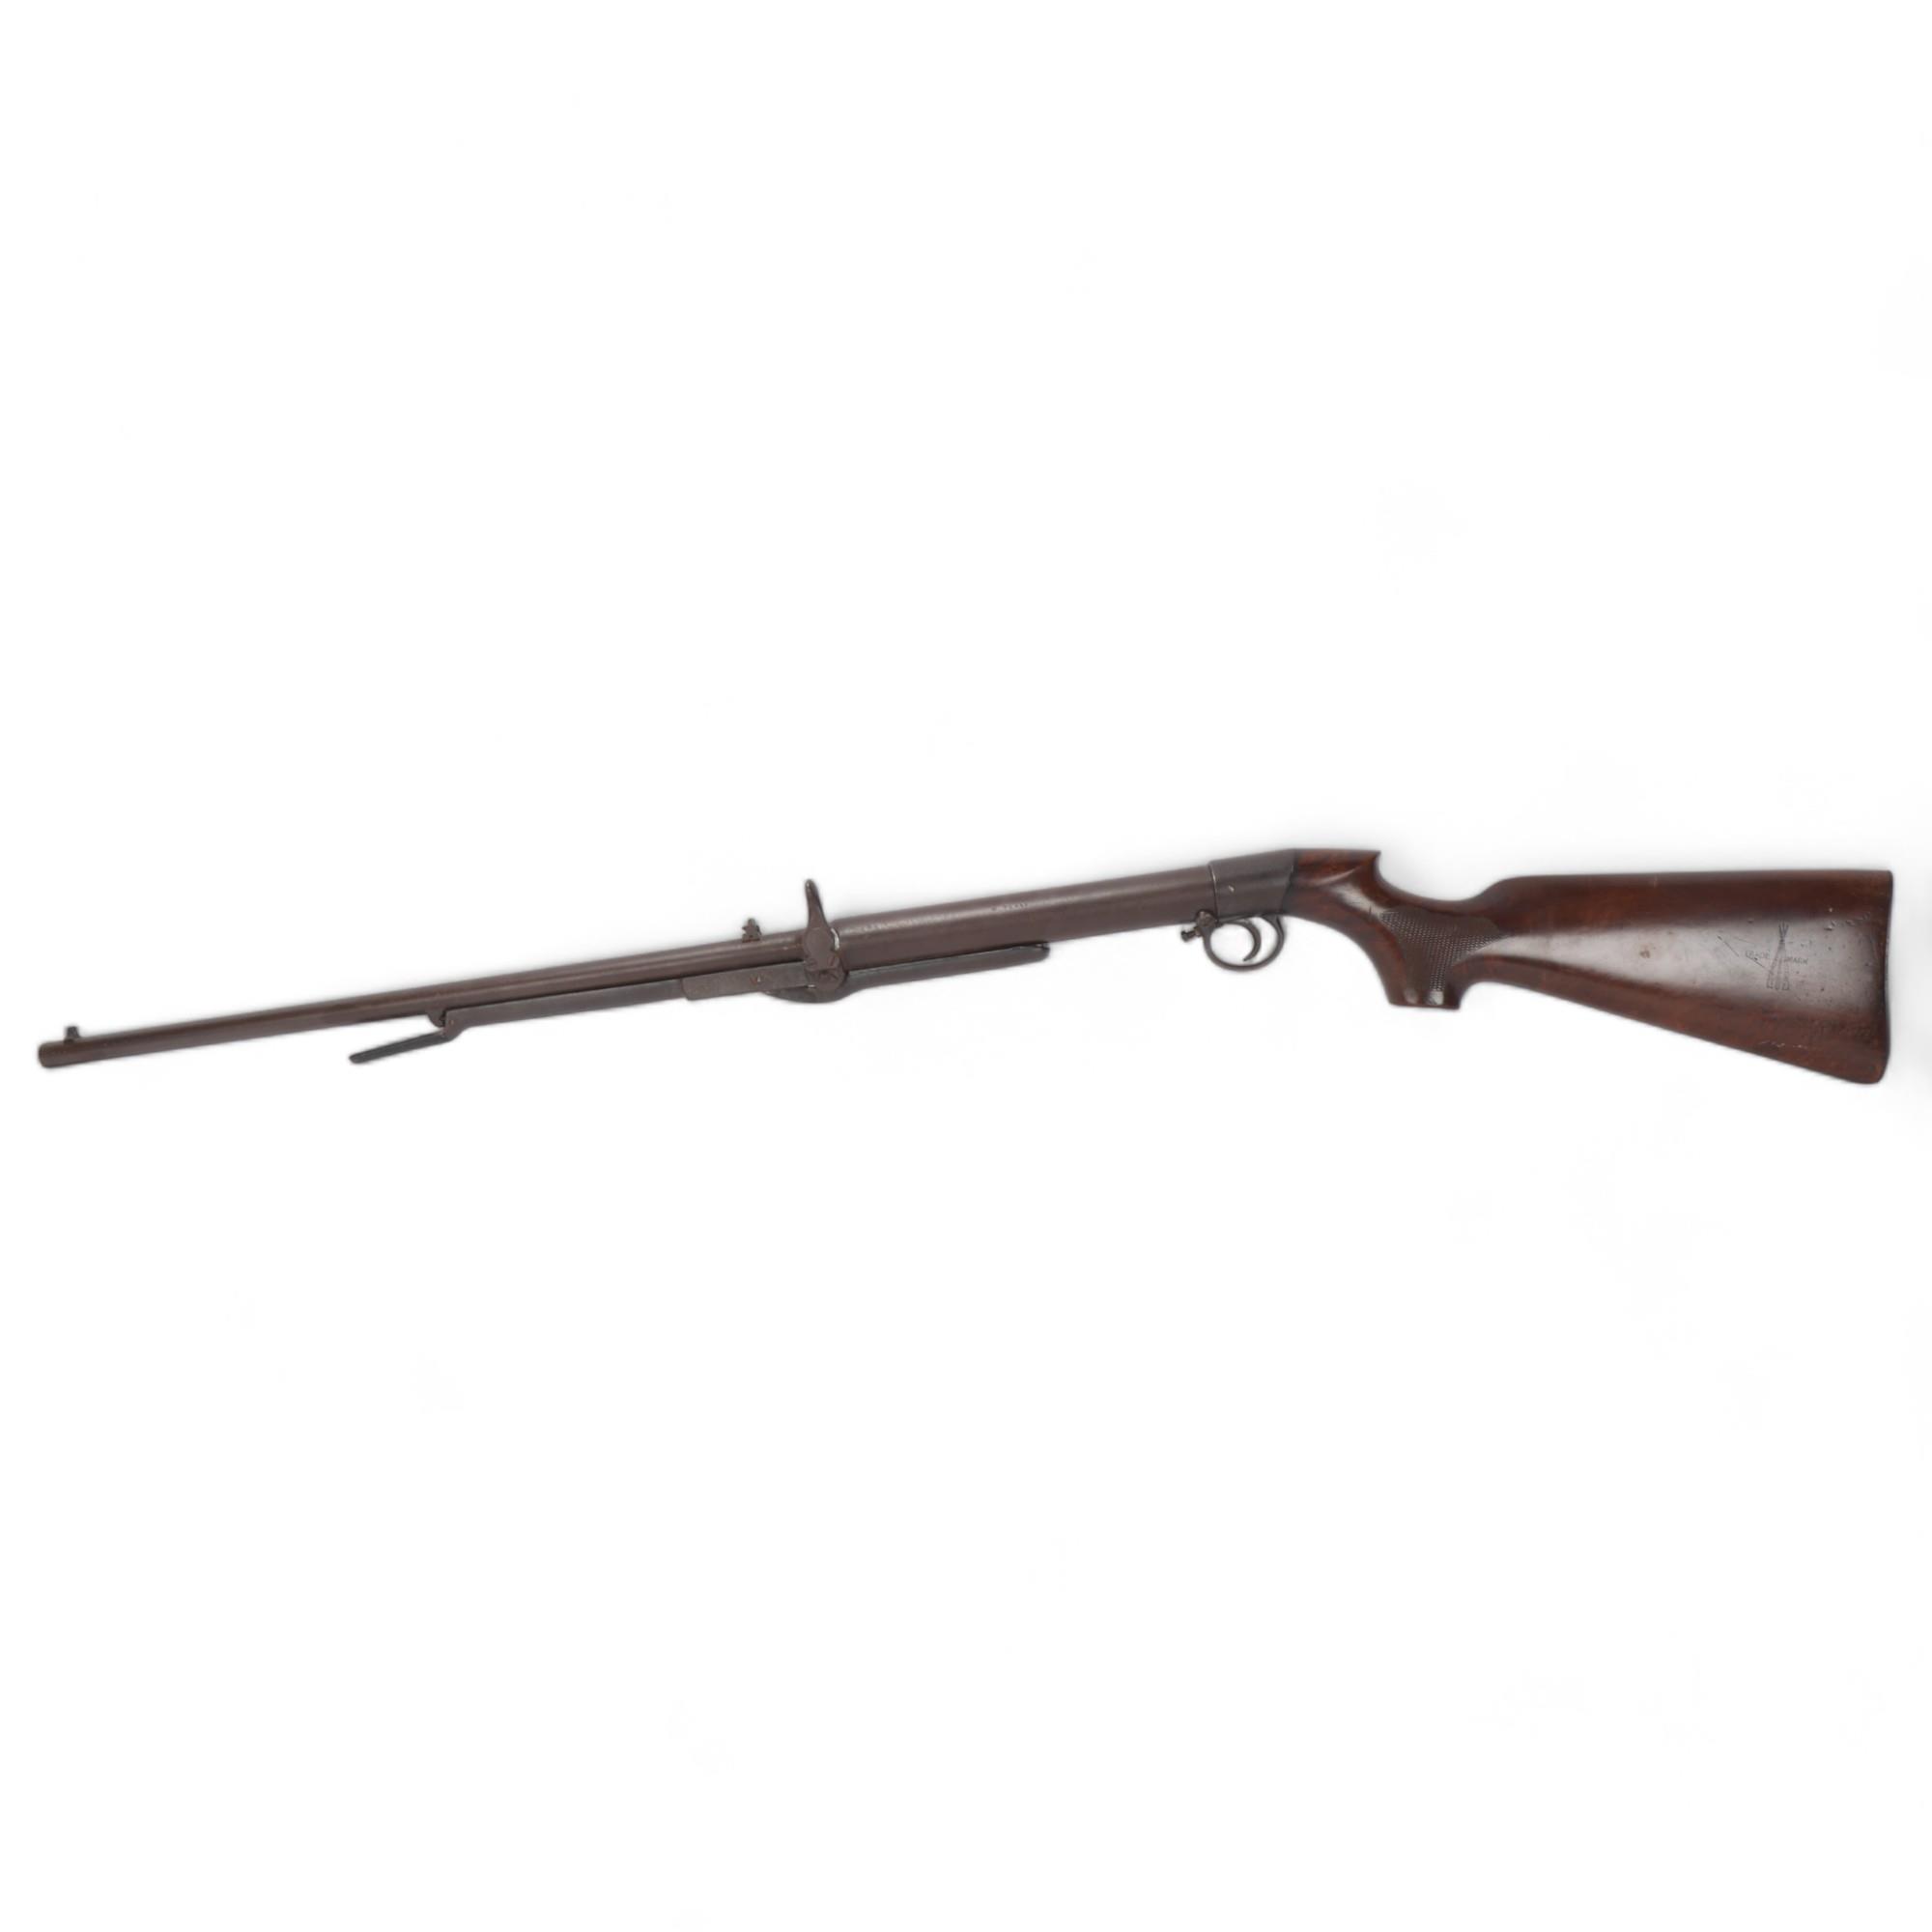 BSA .177 Improved Model D under-lever air rifle with chequered semi-pistol grip and adjustable